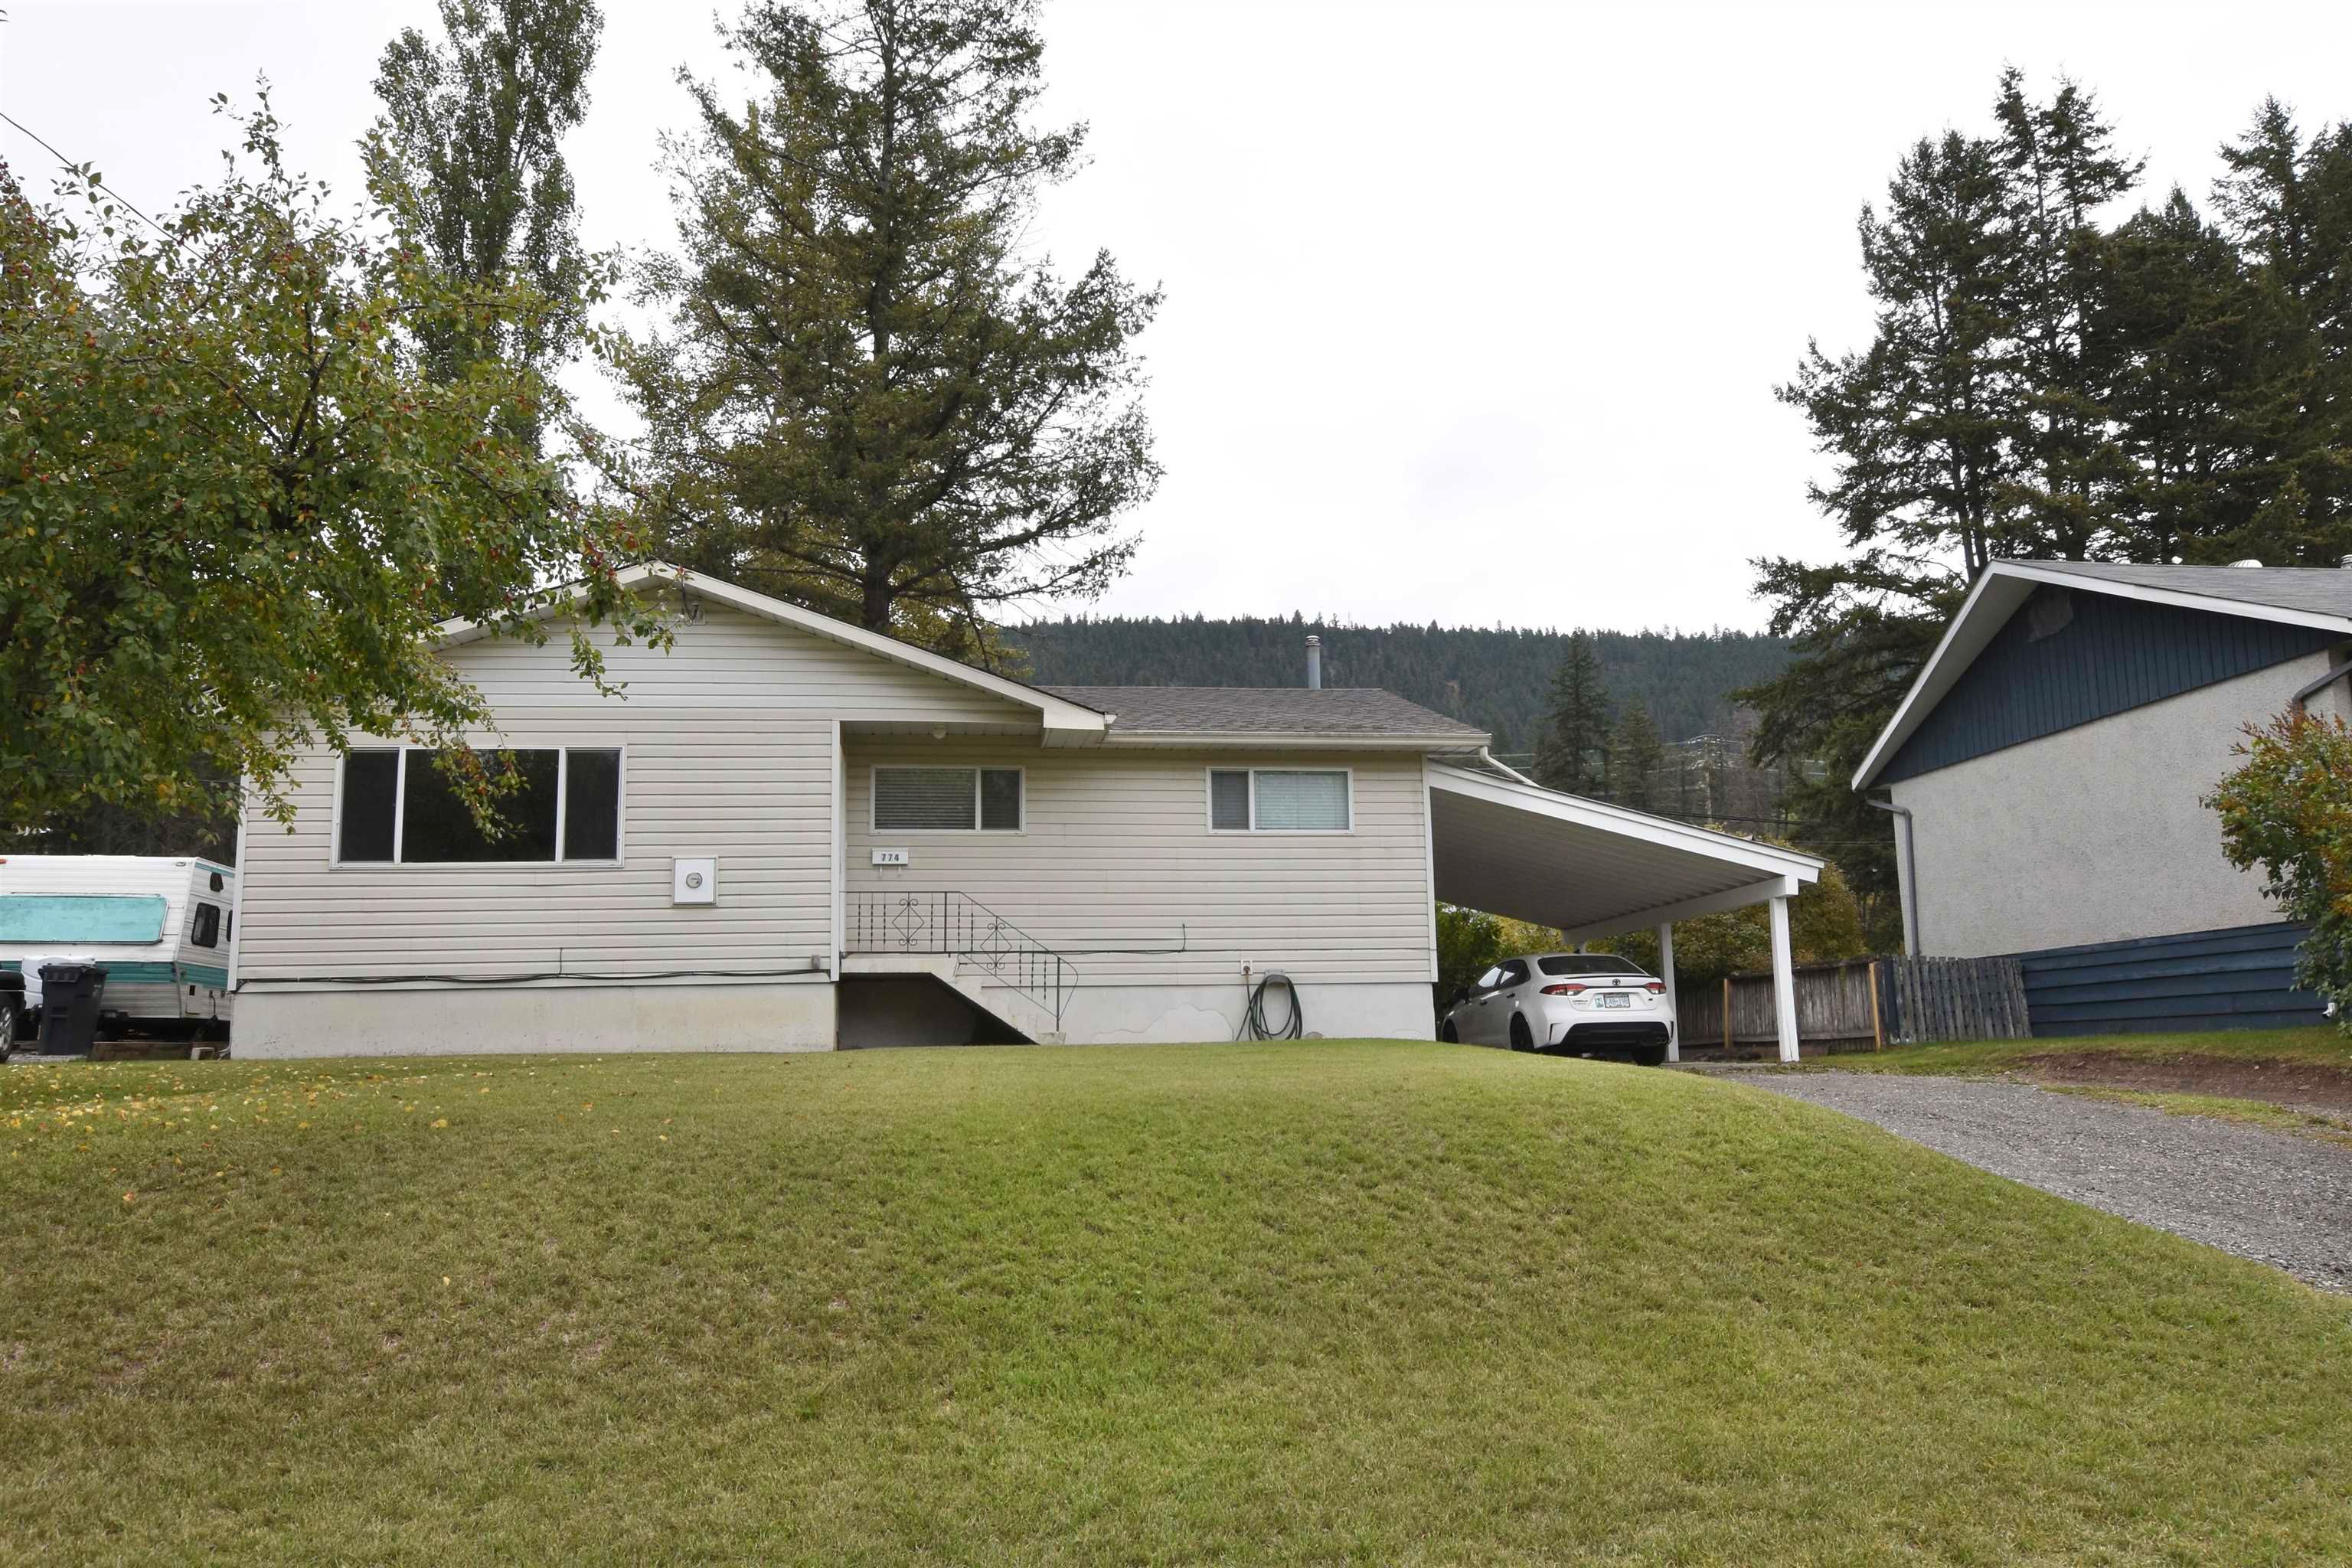 New property listed in Williams Lake - City, Williams Lake (Zone 27)